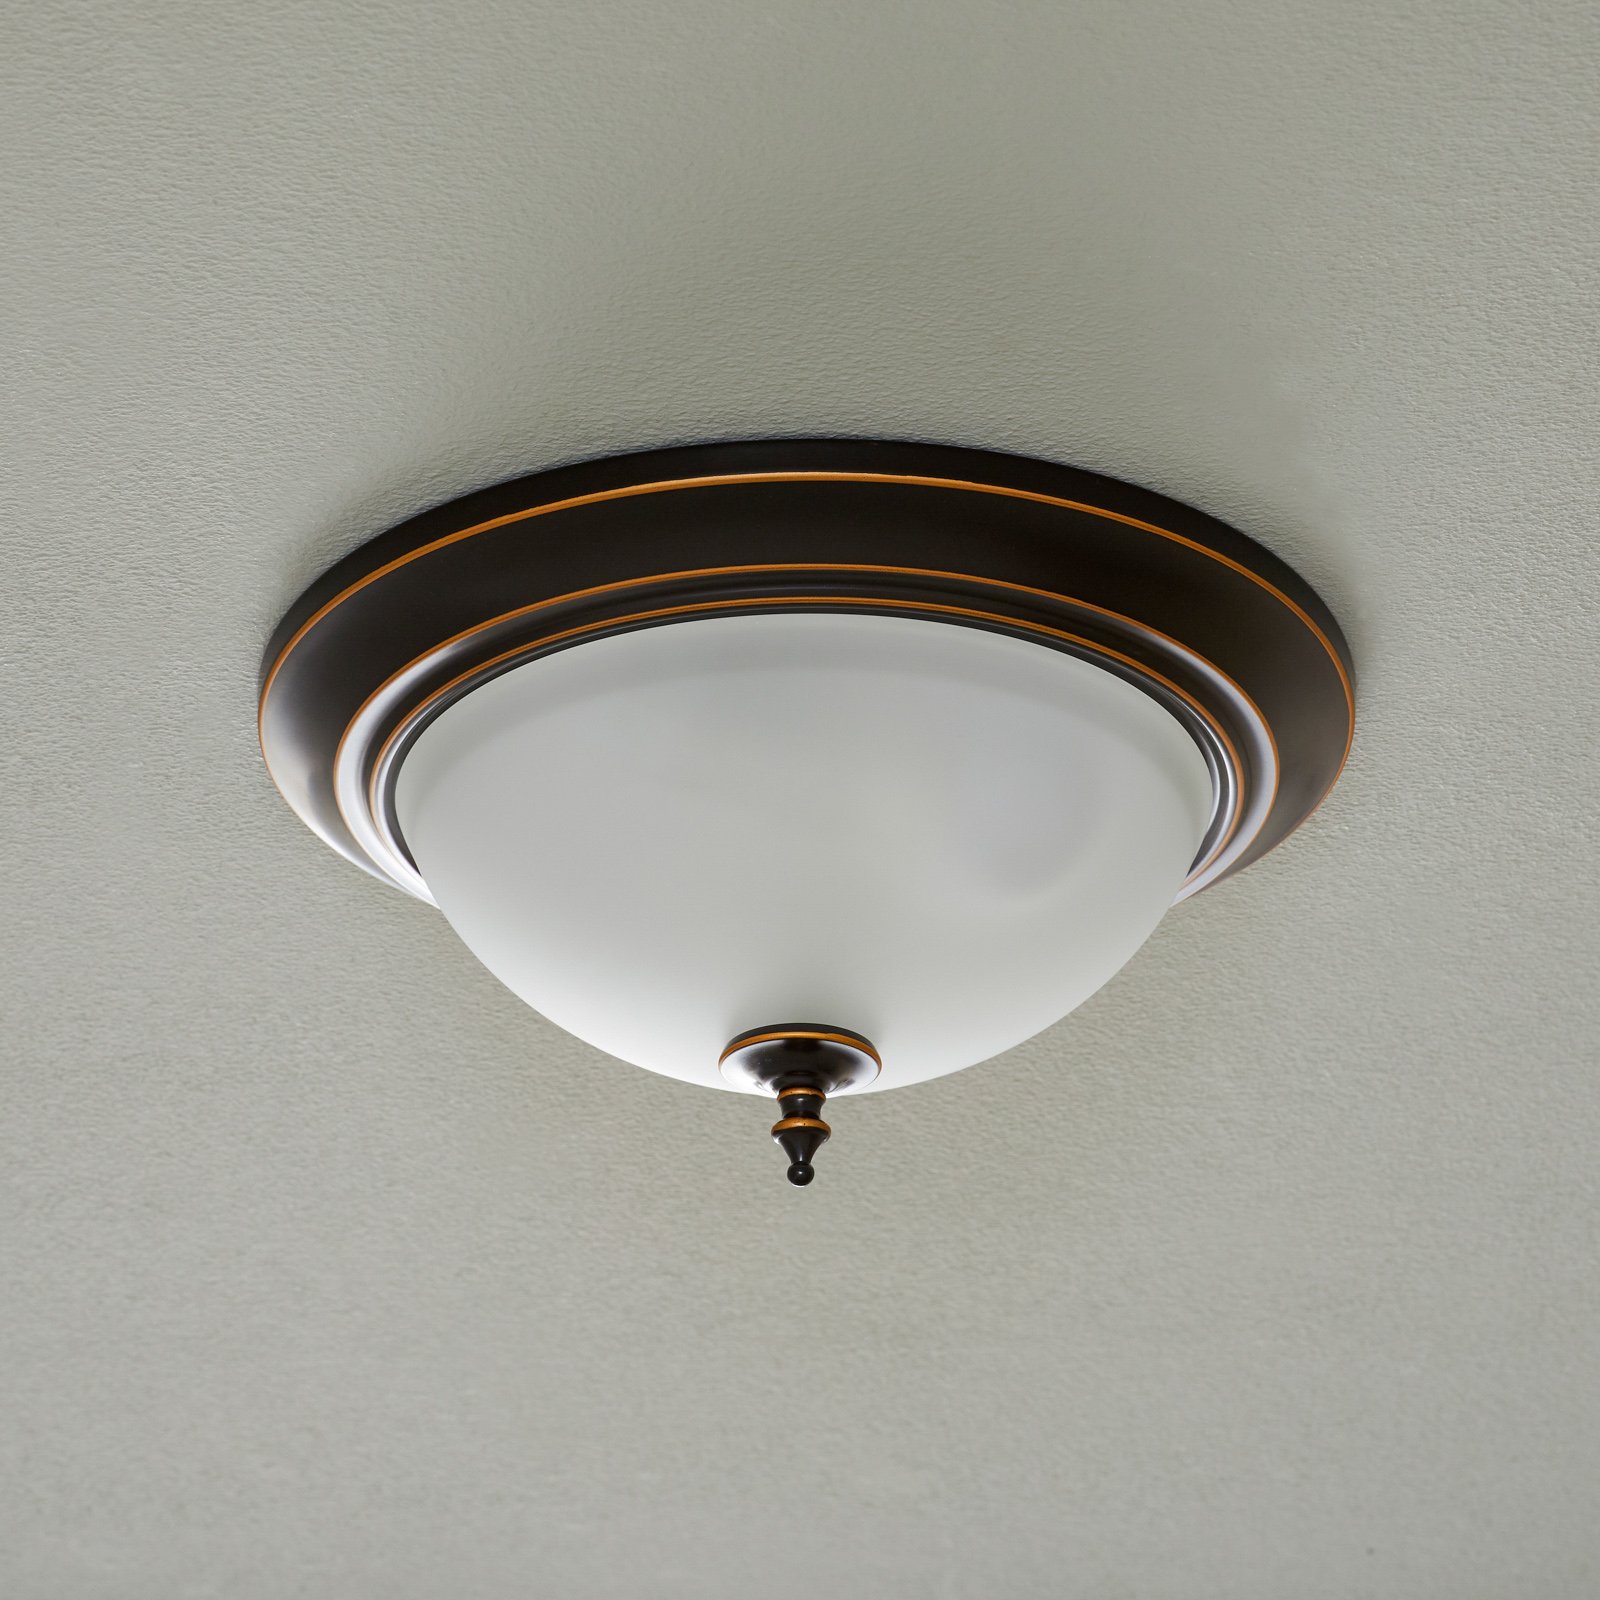 Westinghouse Harwell ceiling light, bronze